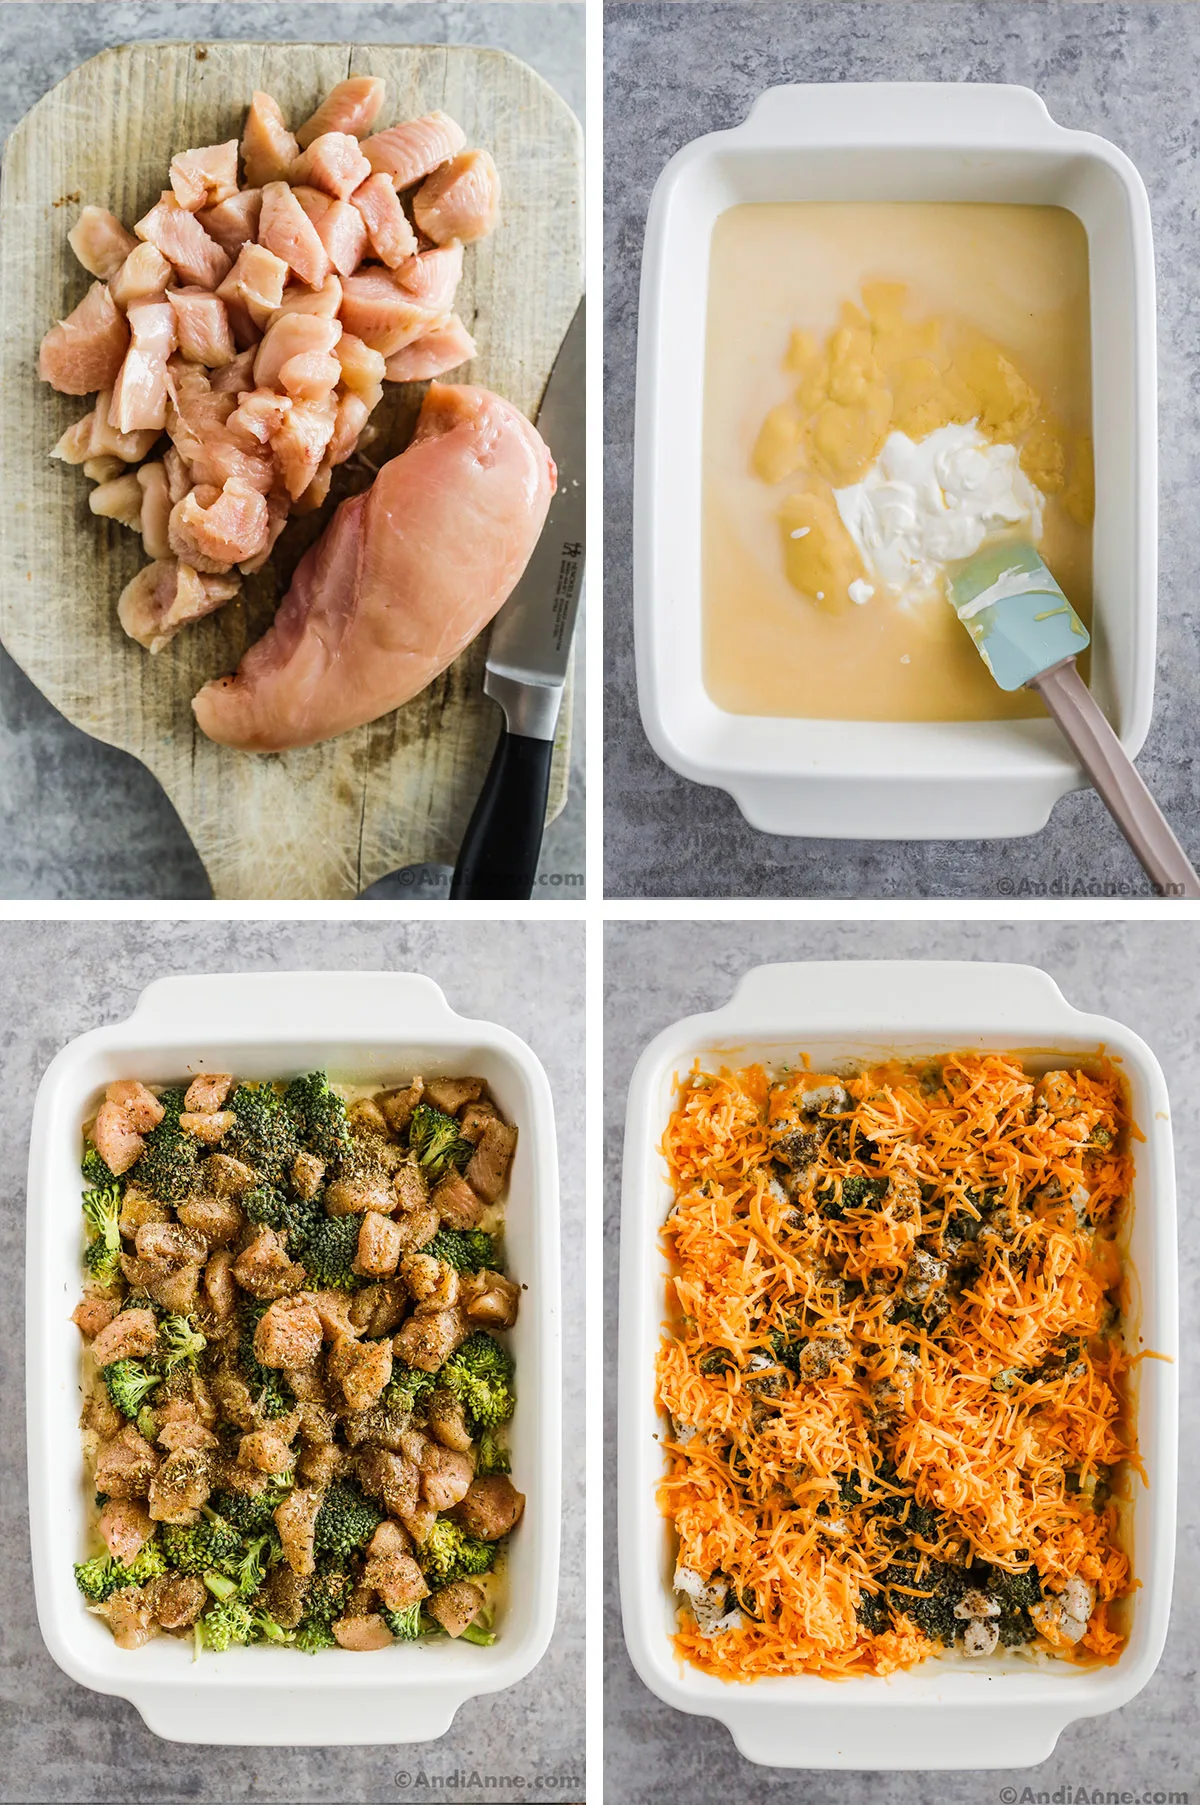 four images grouped together. First is chopped chicken, second is liquids dumped in casserole dish. Third is raw chicken pieces and broccoli florets covered in spices in casserole. Fourth is shredded cheese on top of everything in casserole dish.